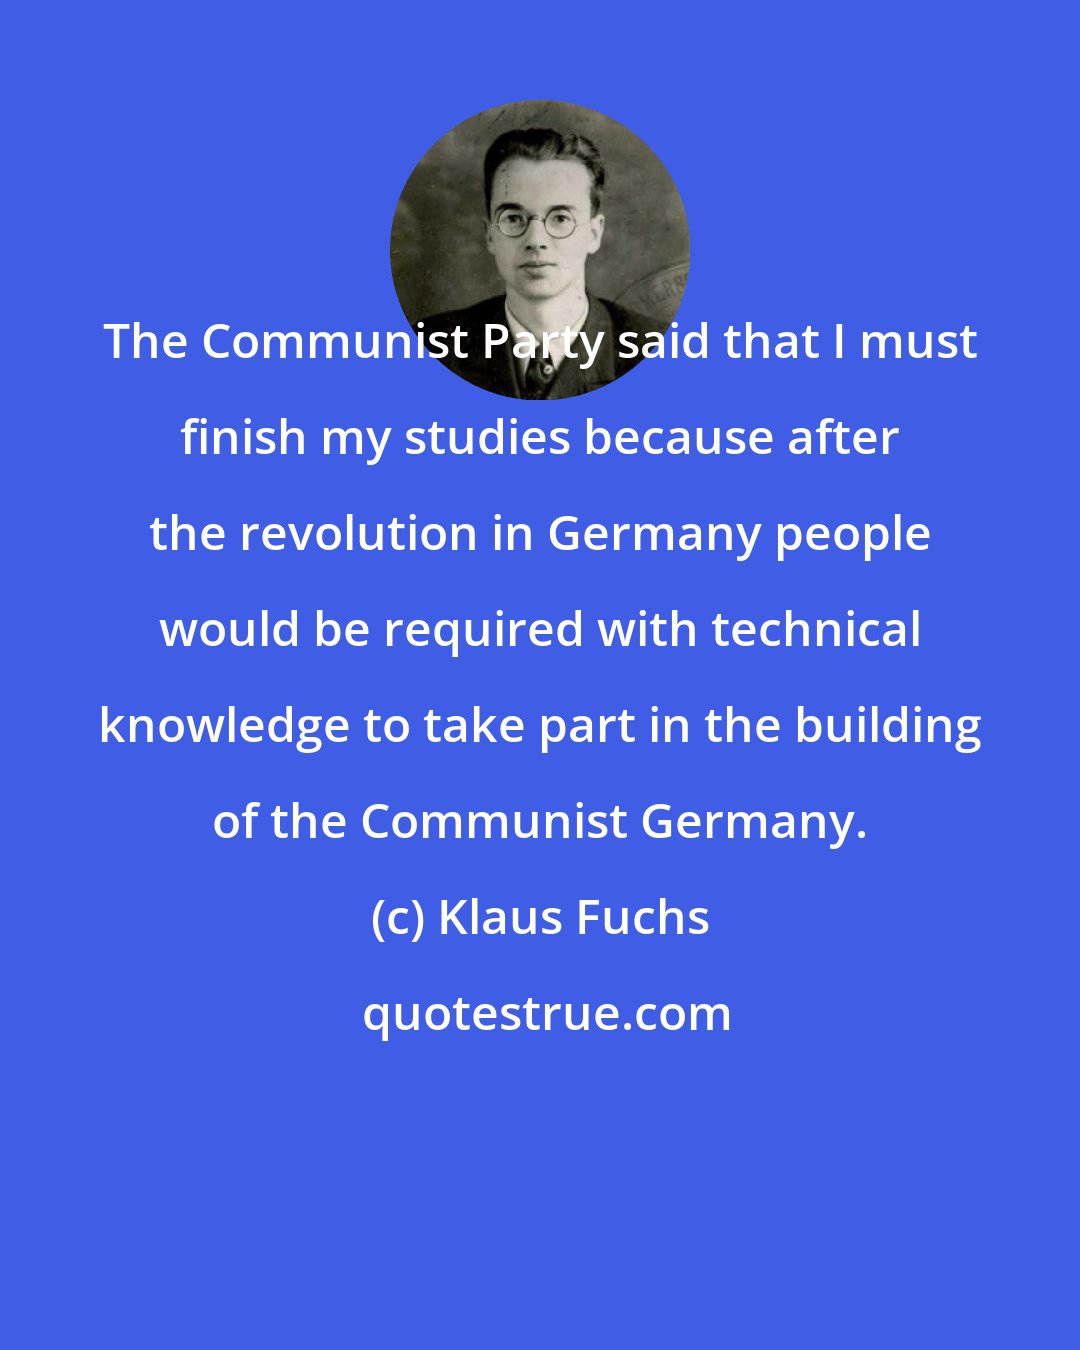 Klaus Fuchs: The Communist Party said that I must finish my studies because after the revolution in Germany people would be required with technical knowledge to take part in the building of the Communist Germany.